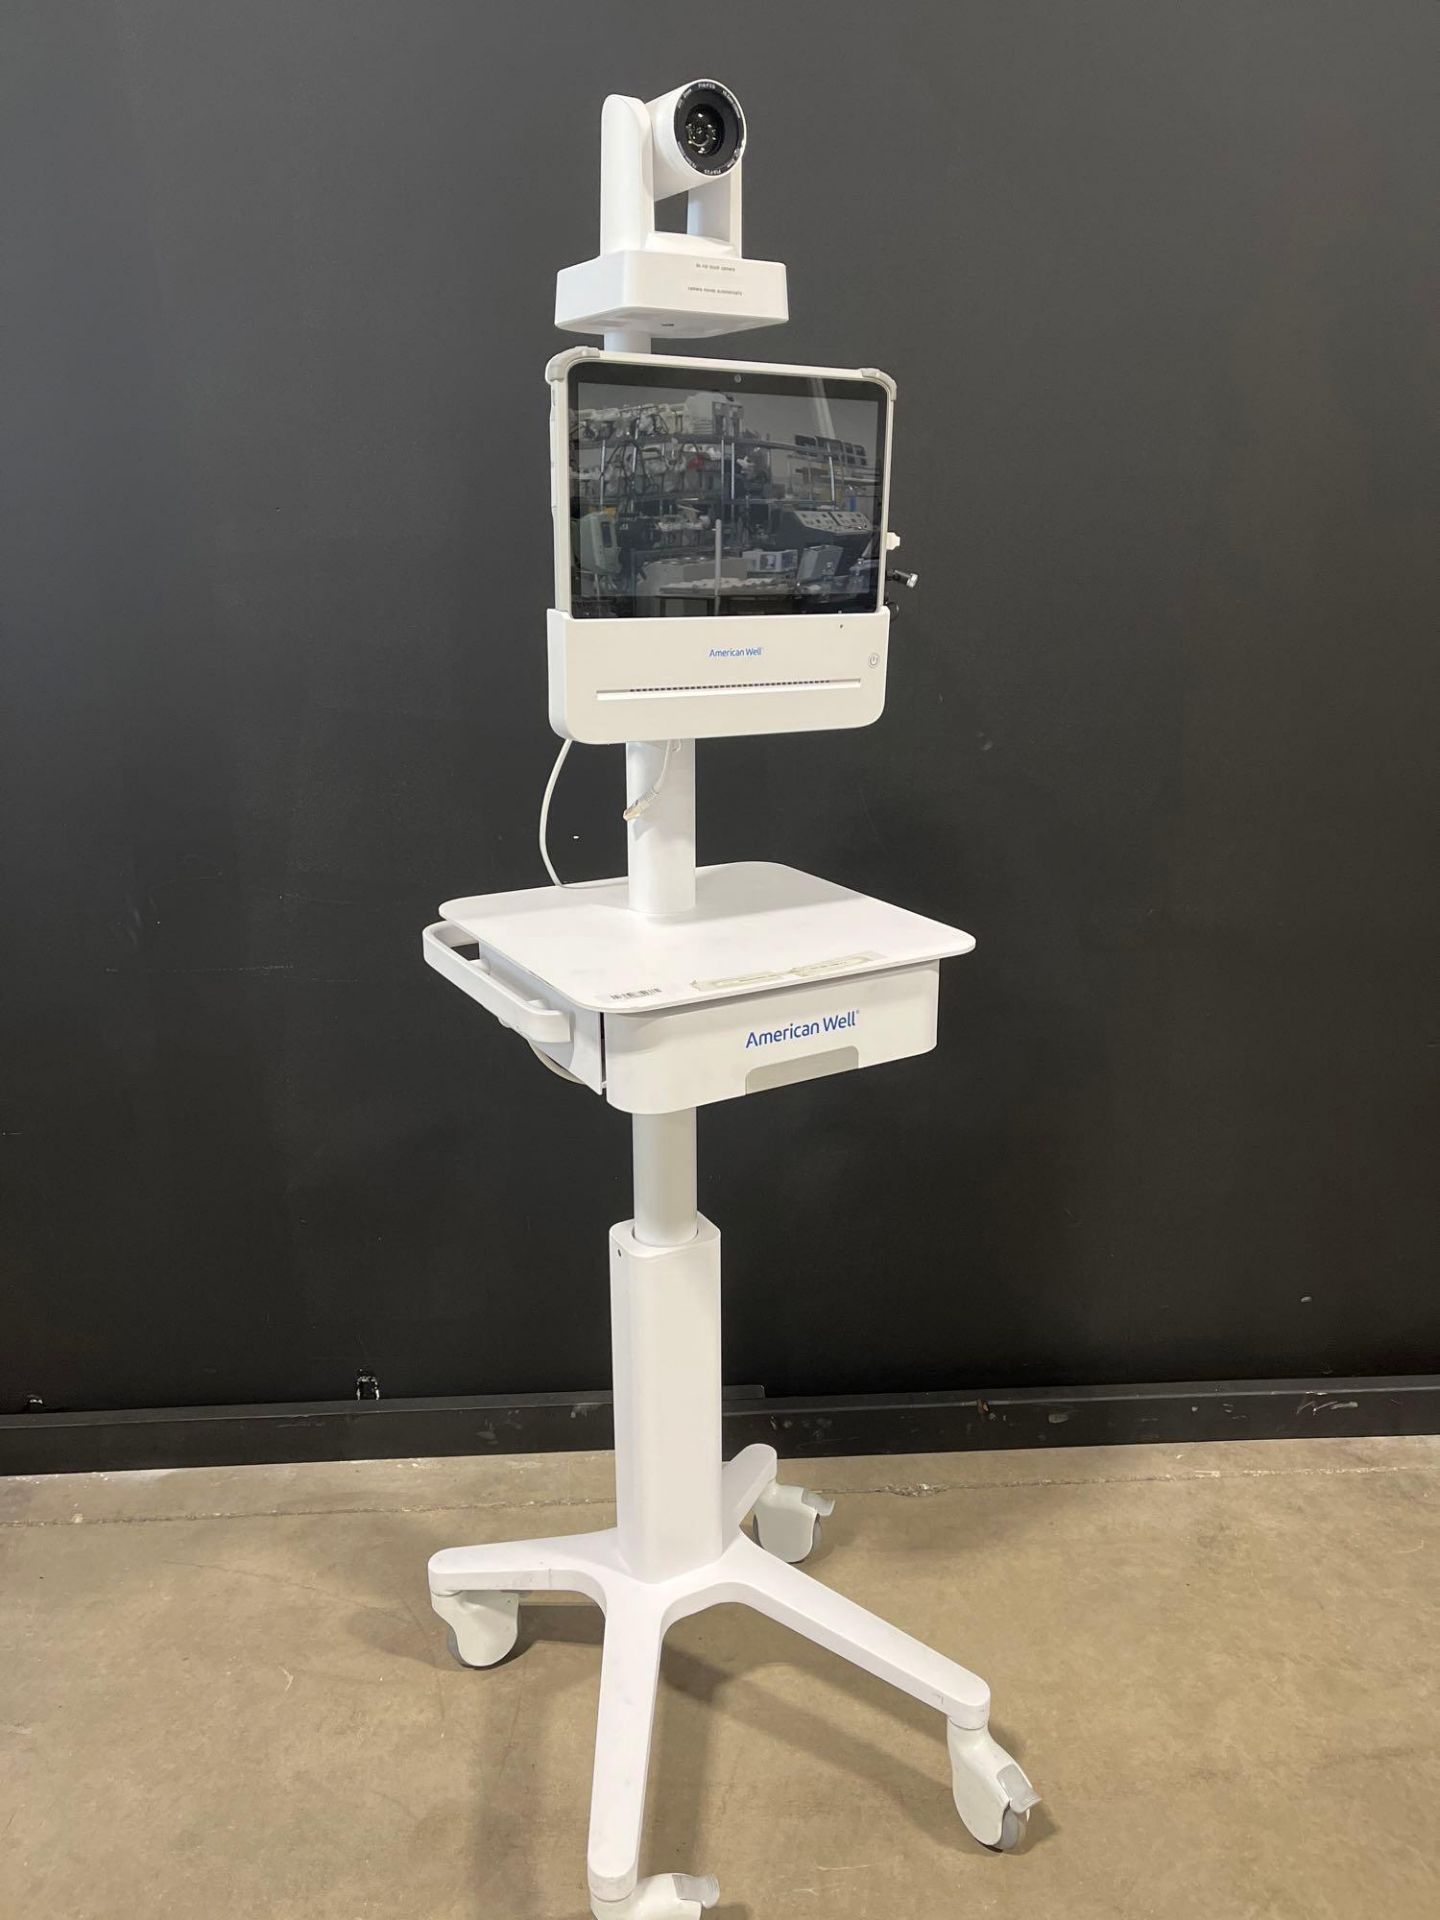 TANGENT MEDIX T13 V2 MEDICAL TABLET ON AMERICAN WELL CART - Image 2 of 4